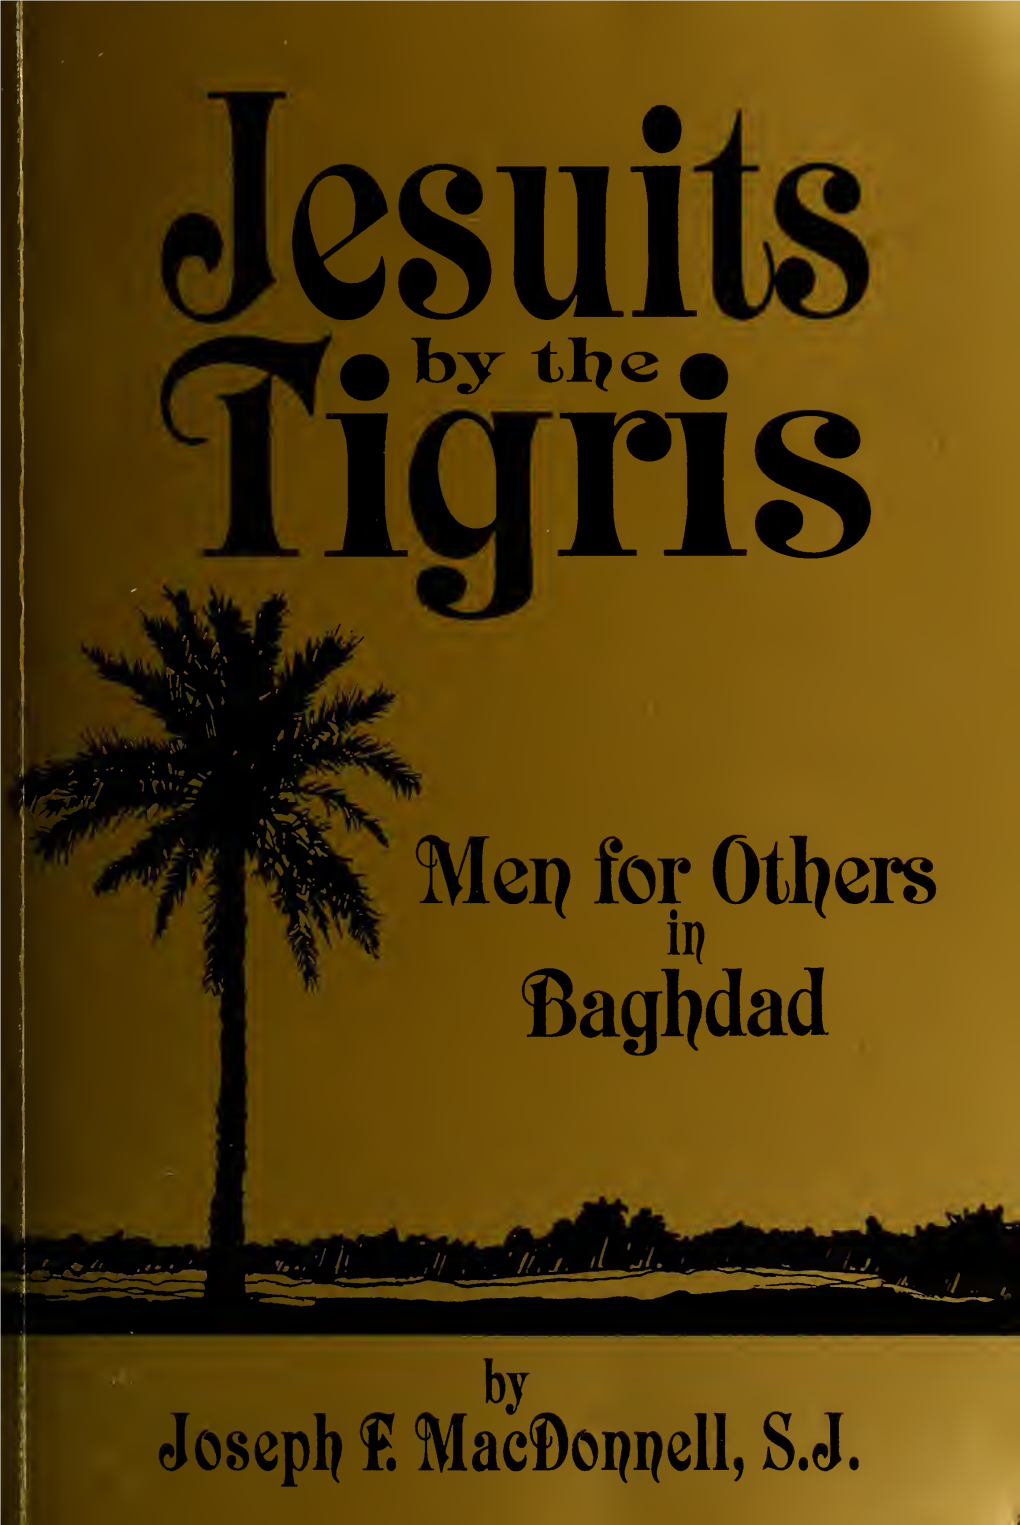 Jesuits by the Tigris: Men for Others in Bahgdad